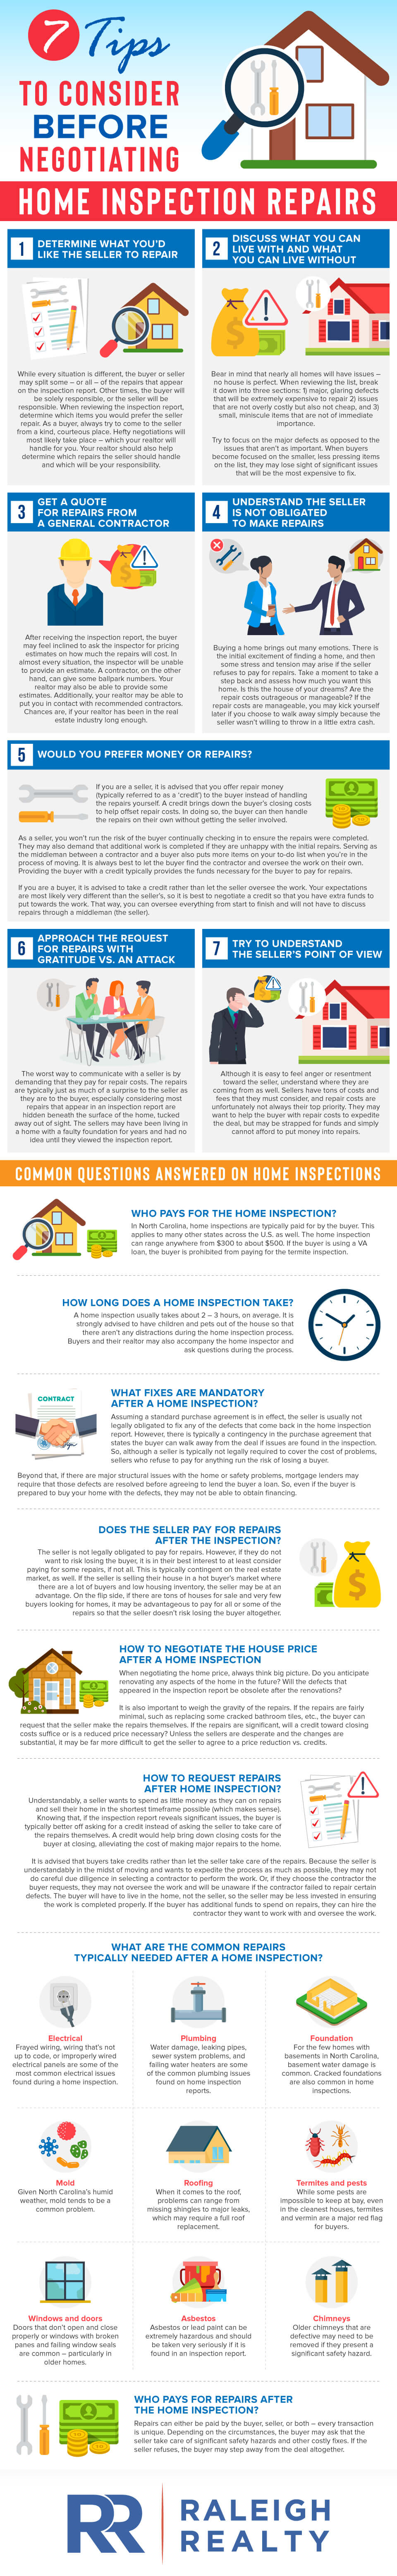 7 Tips To Consider Before Negotiating Home Inspection Repairs